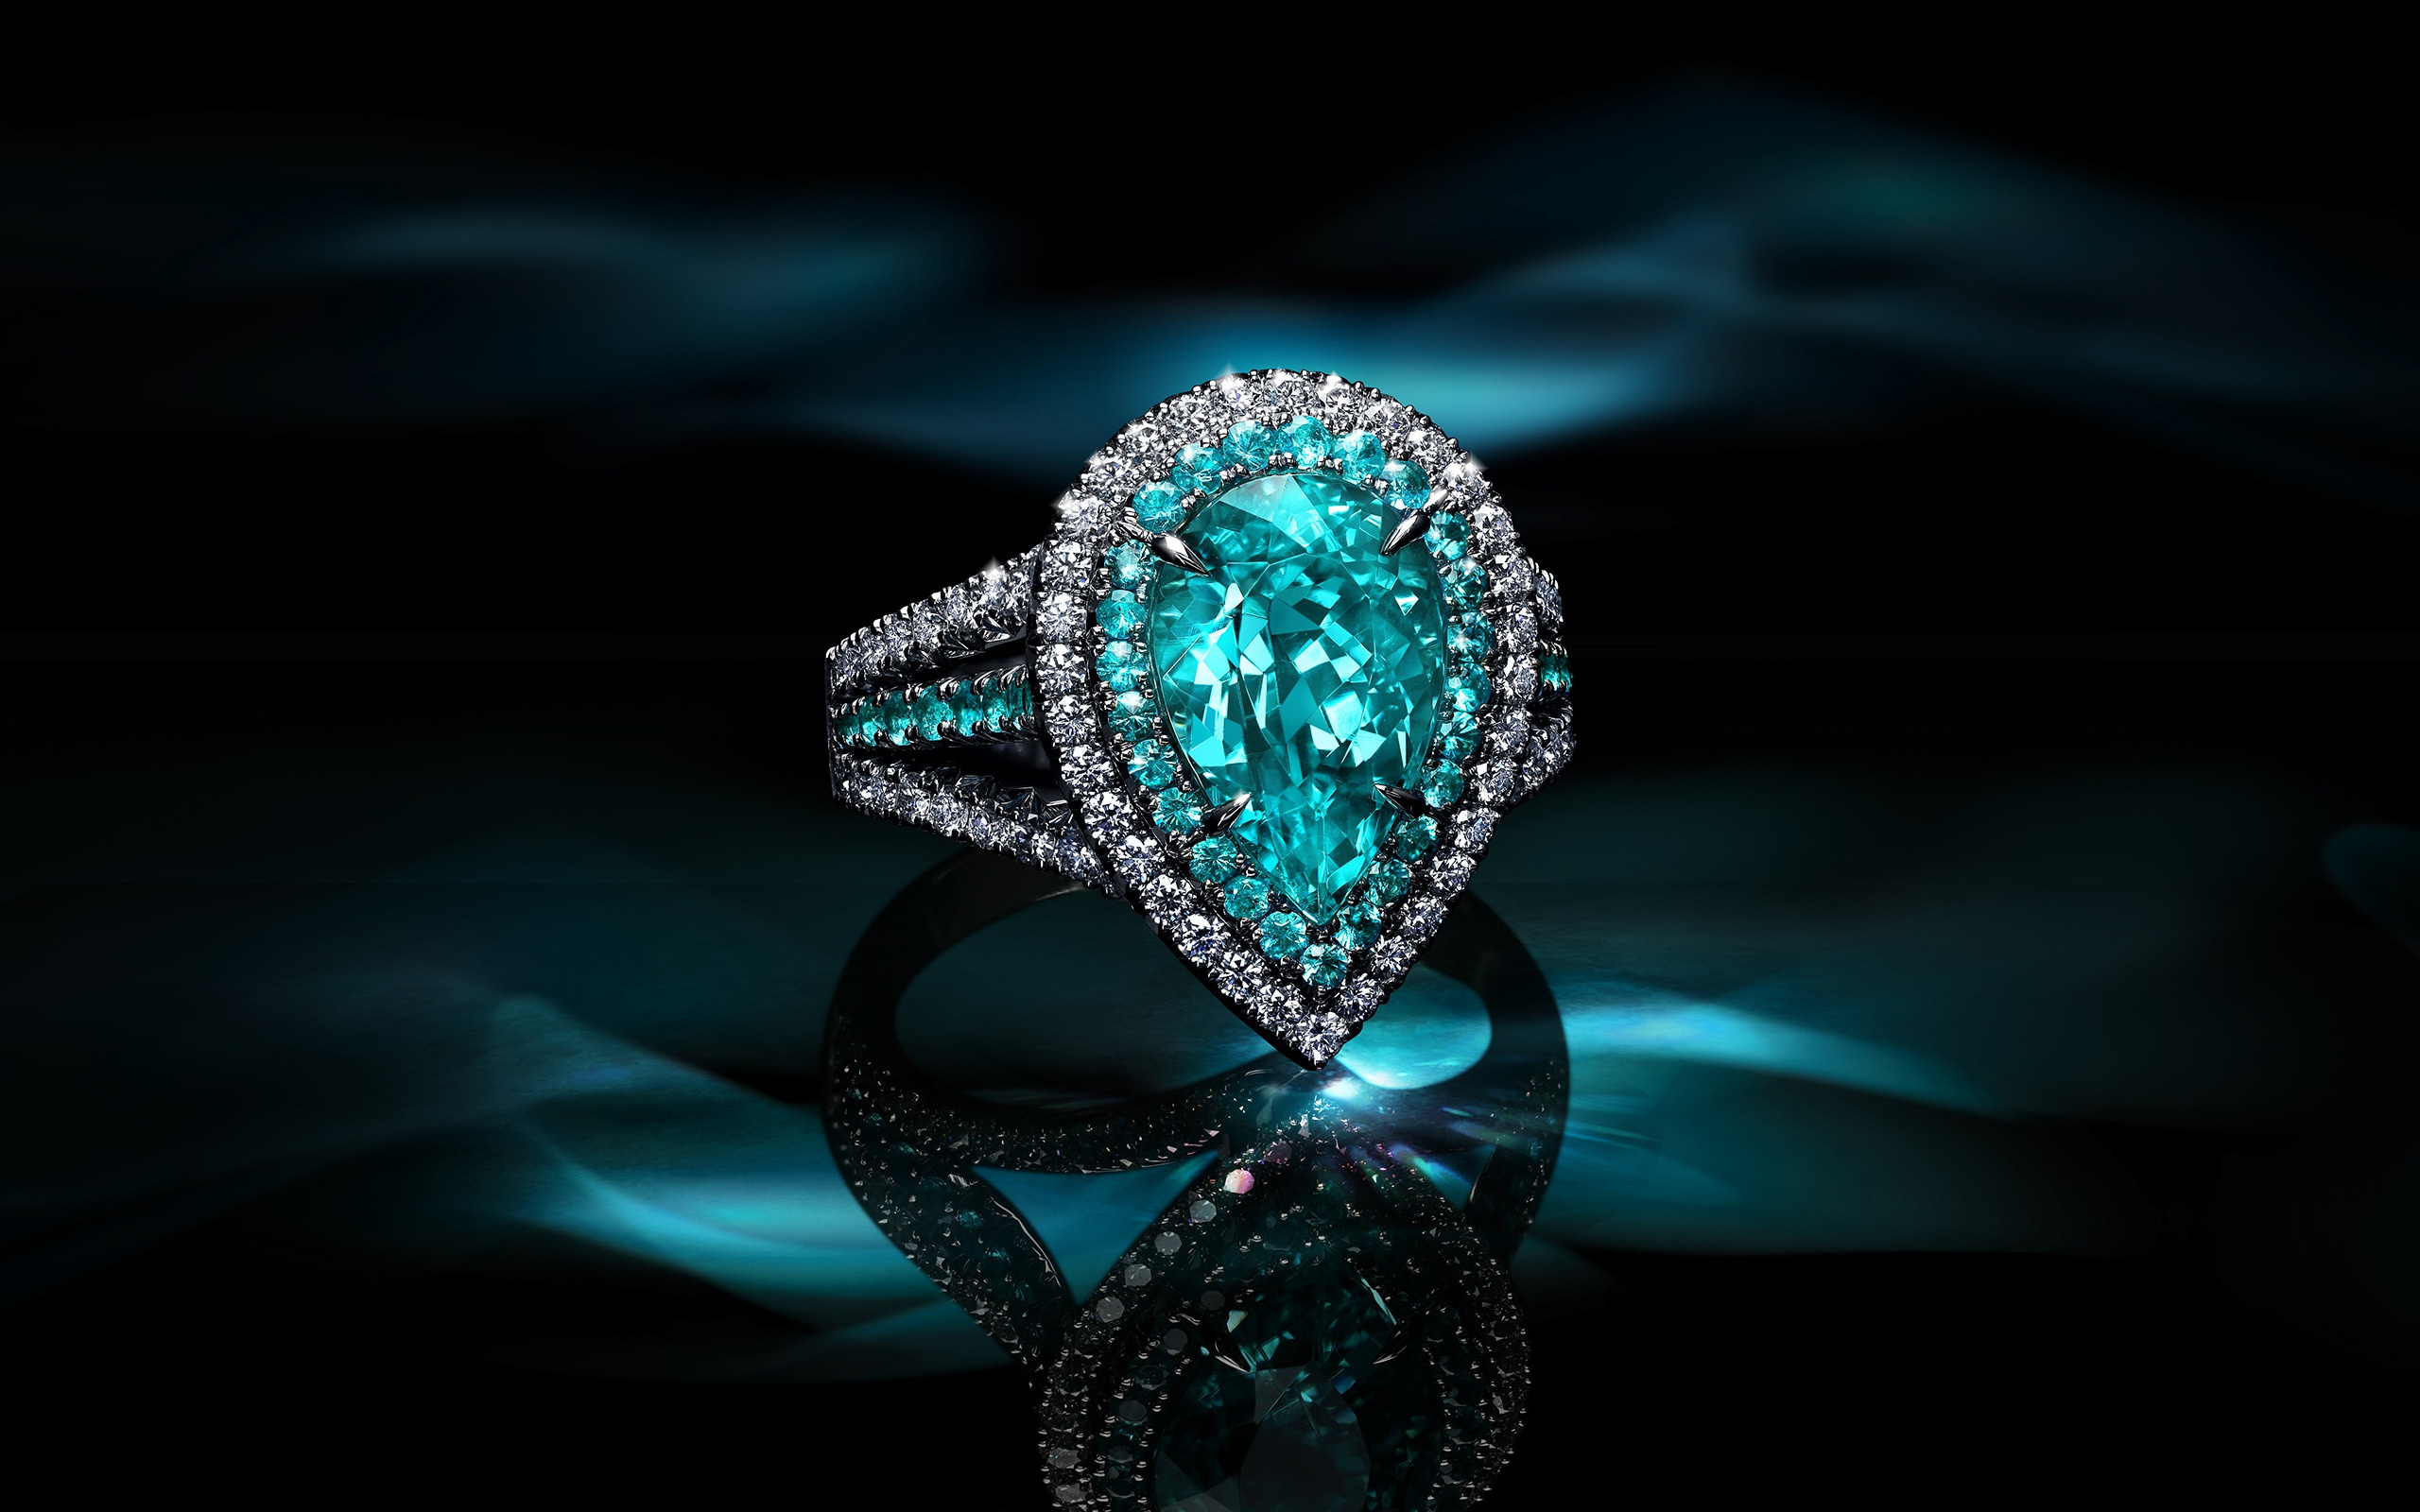 Sapphire gemstone wallpapers, High-quality pictures, Precious jewelry, 2560x1600 HD Desktop